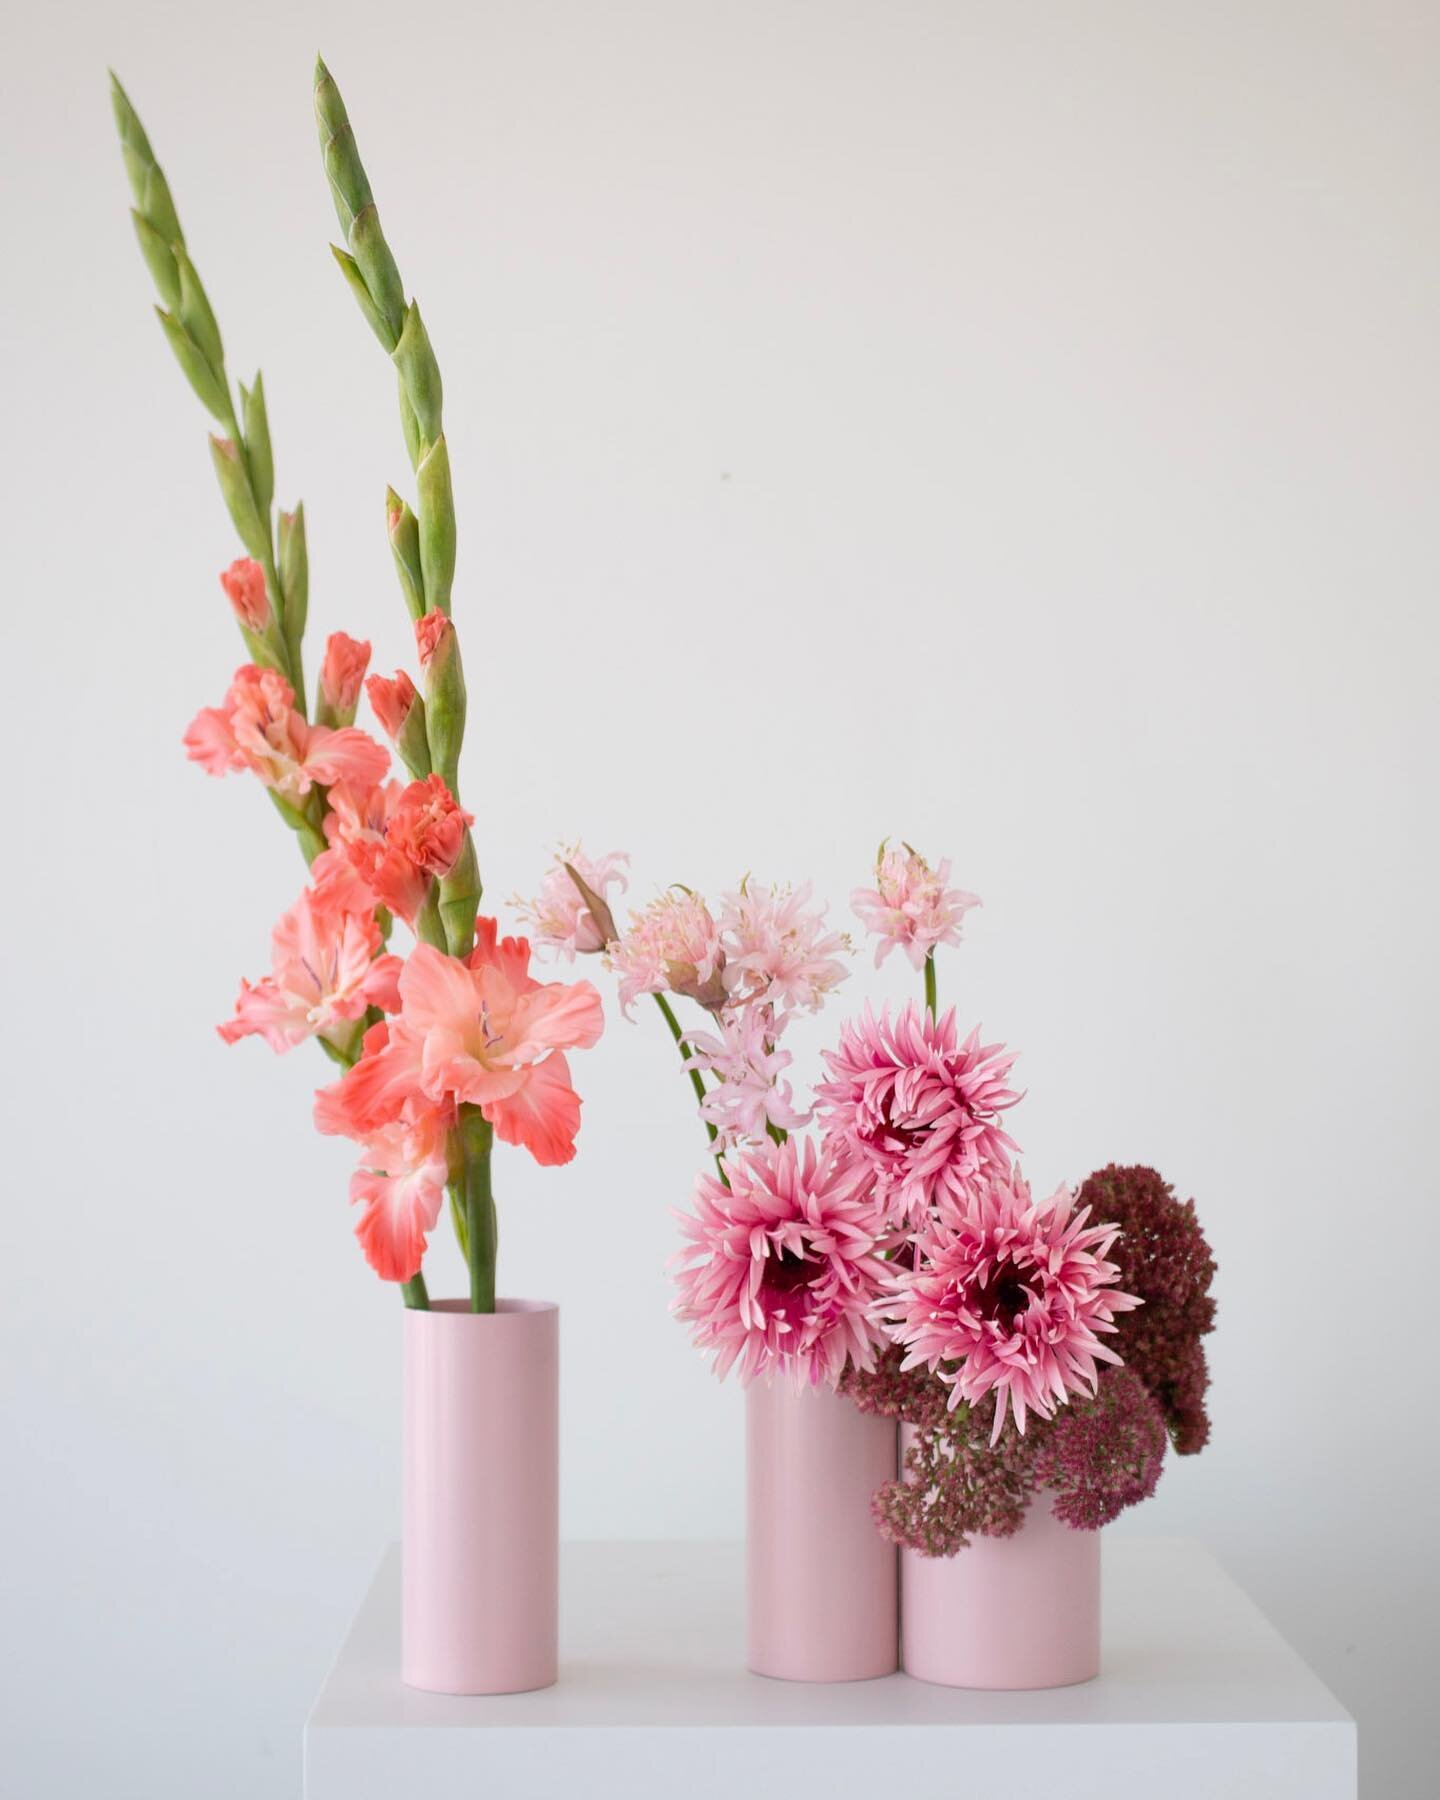 I&rsquo;ve added a new service to the LDF bouquet offer. A Mini Vase Set, perfect for any business size (or home) wanting to add a pop of colour to their HQ&hellip;
Style them together or separate them out as you desire. This service is available wee